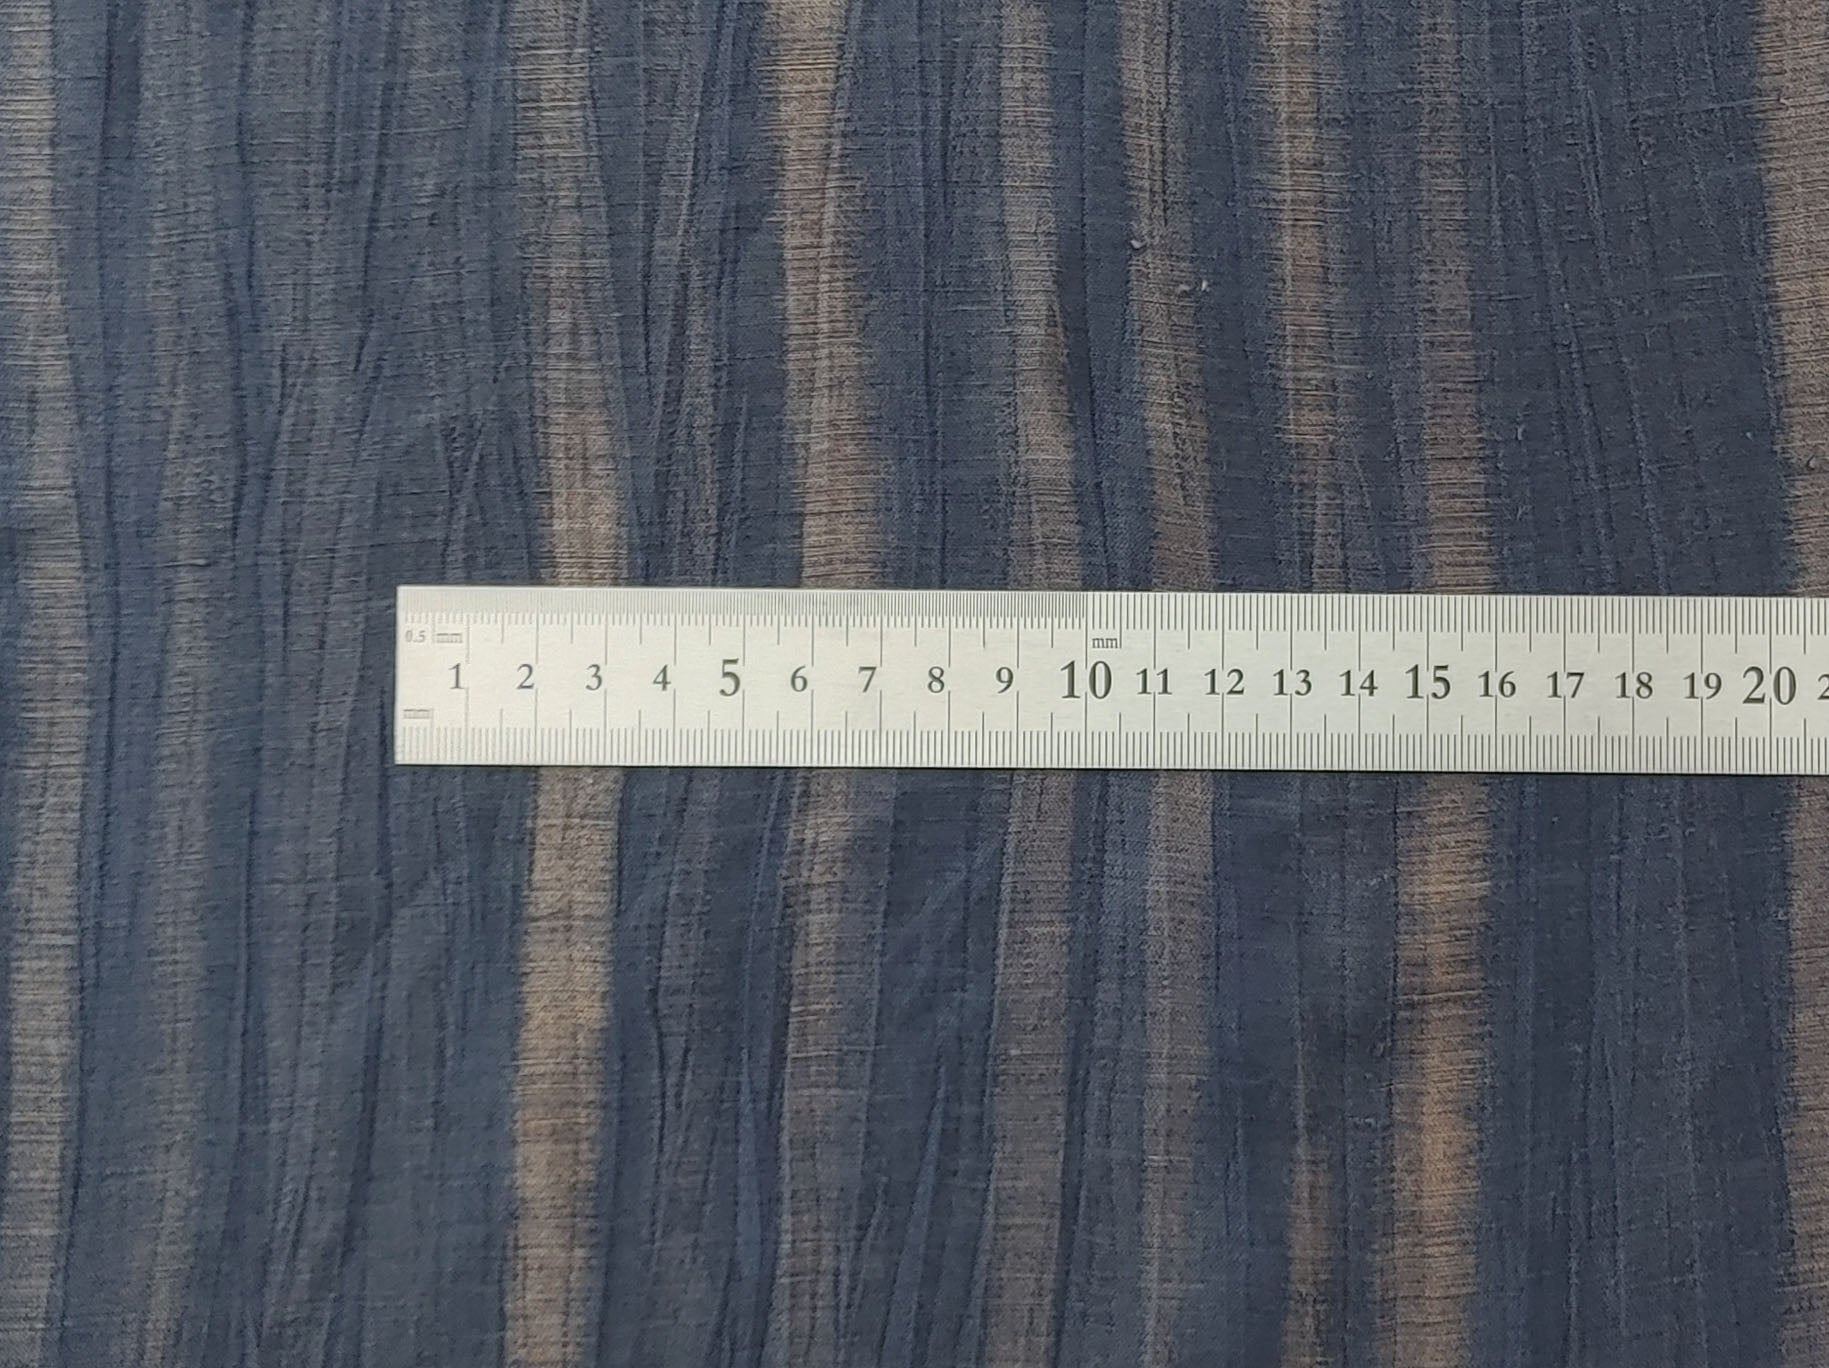 Navy Linen Nylon Fabric with Striped Print and Crease Effect 4262 - The Linen Lab - Navy